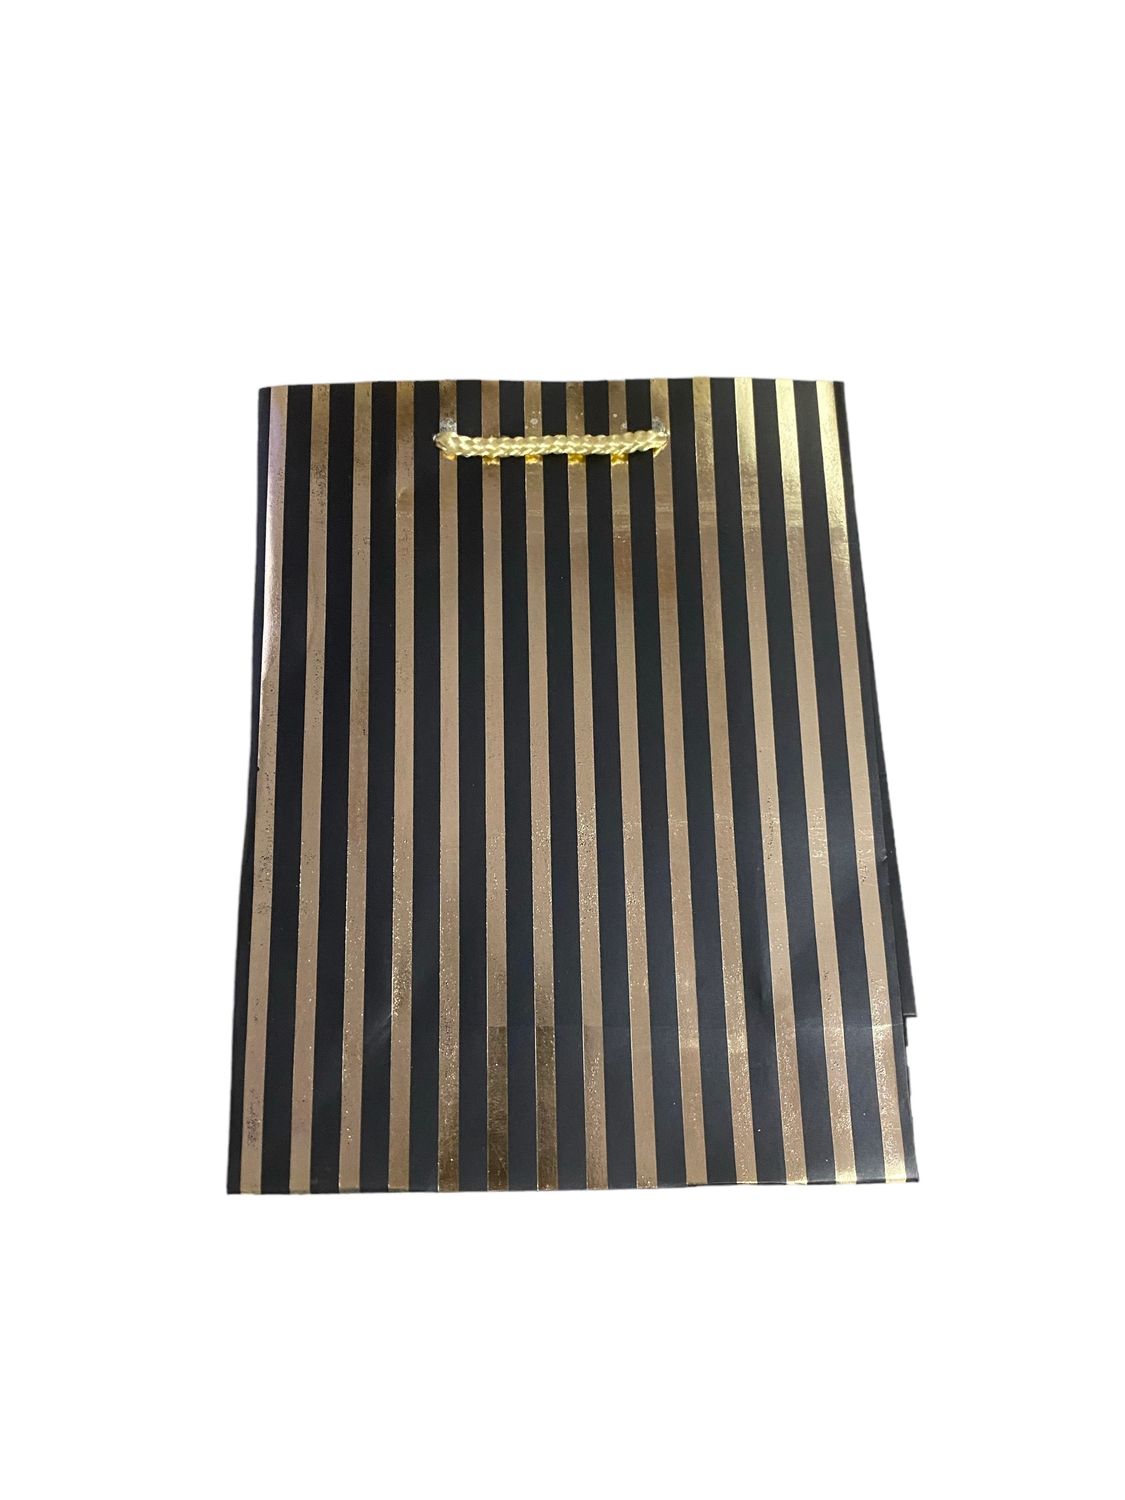 Gold and Black Lines Large Gift Bag PK3 (R19.50 Each)